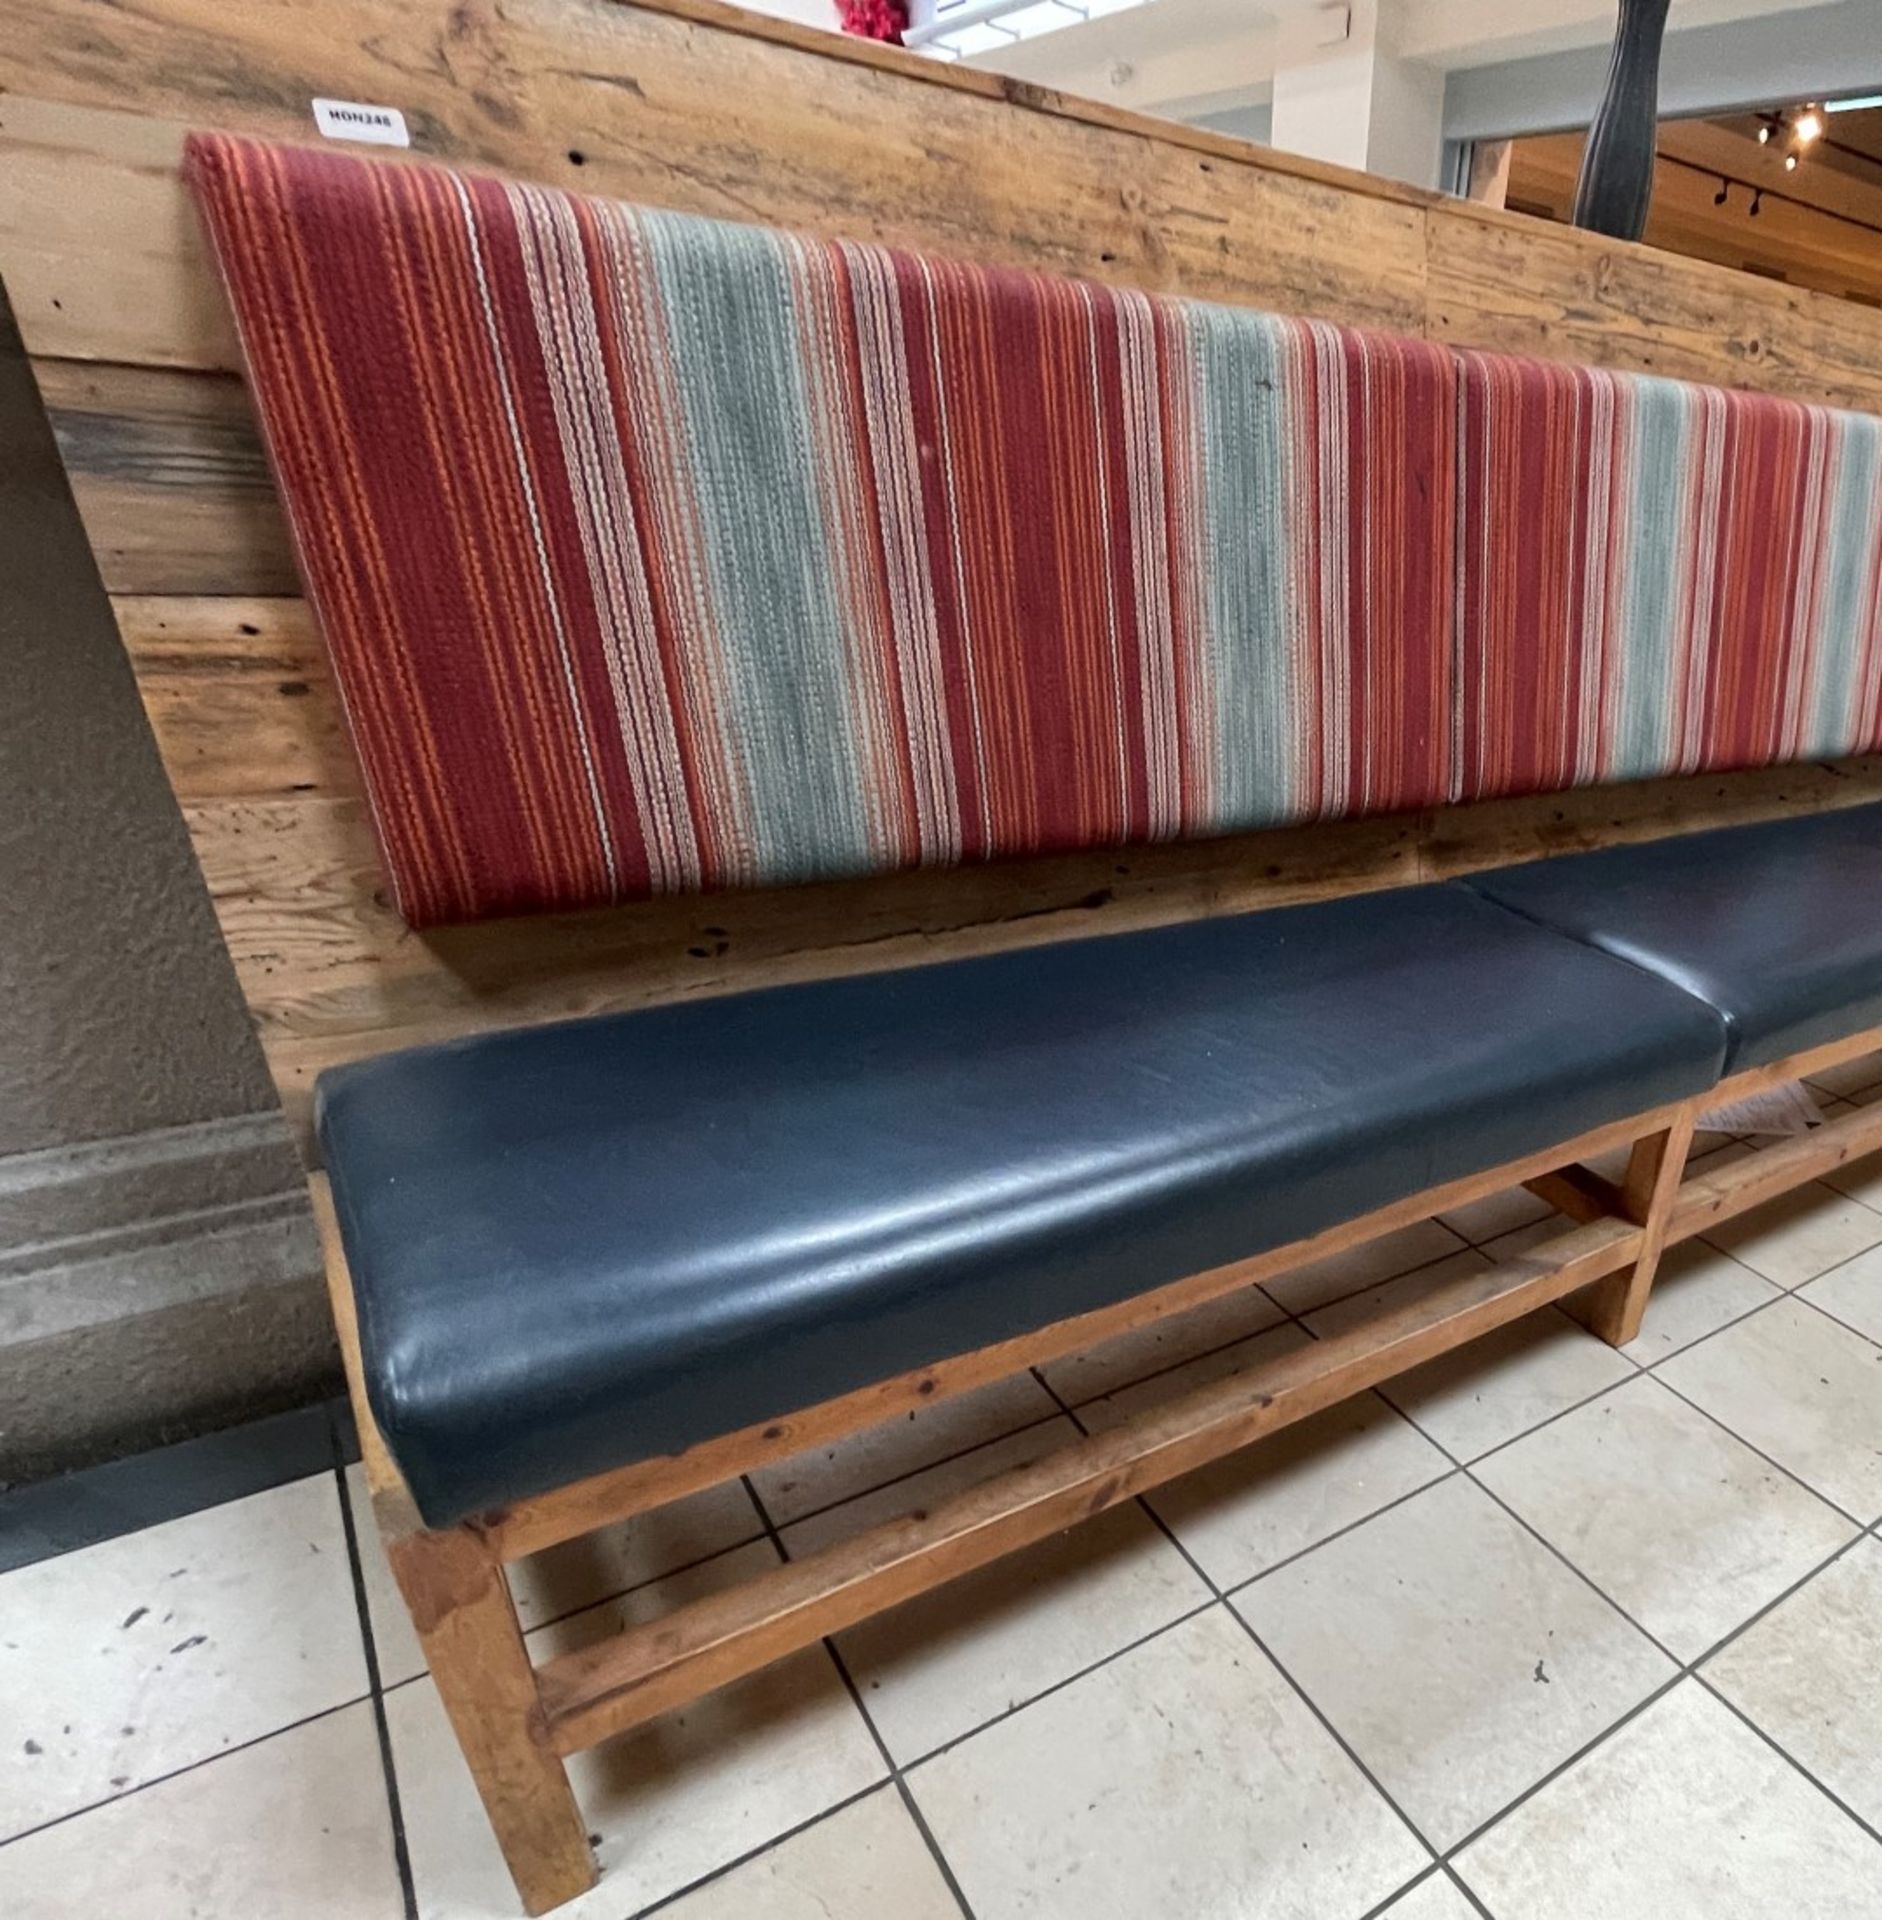 1 x Wooden Seating Bench Featuring Genuine Leather Seat Pads and Striped Fabric Back Rests - - Image 7 of 11